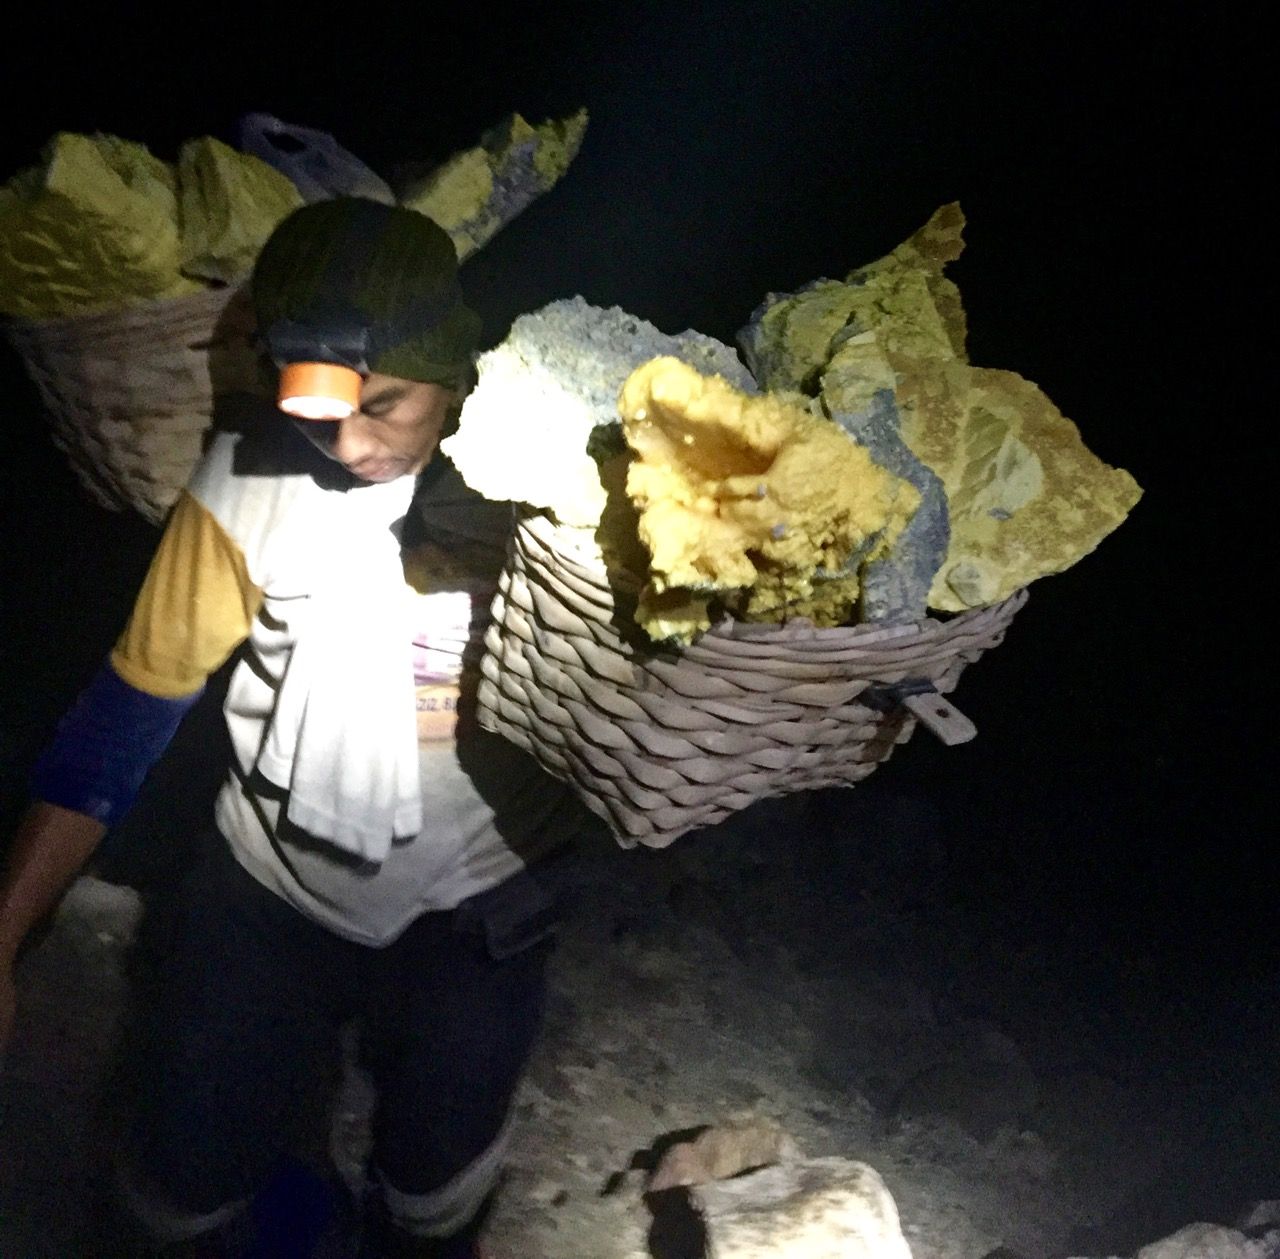 A worker carrying raw sulphur on his back.